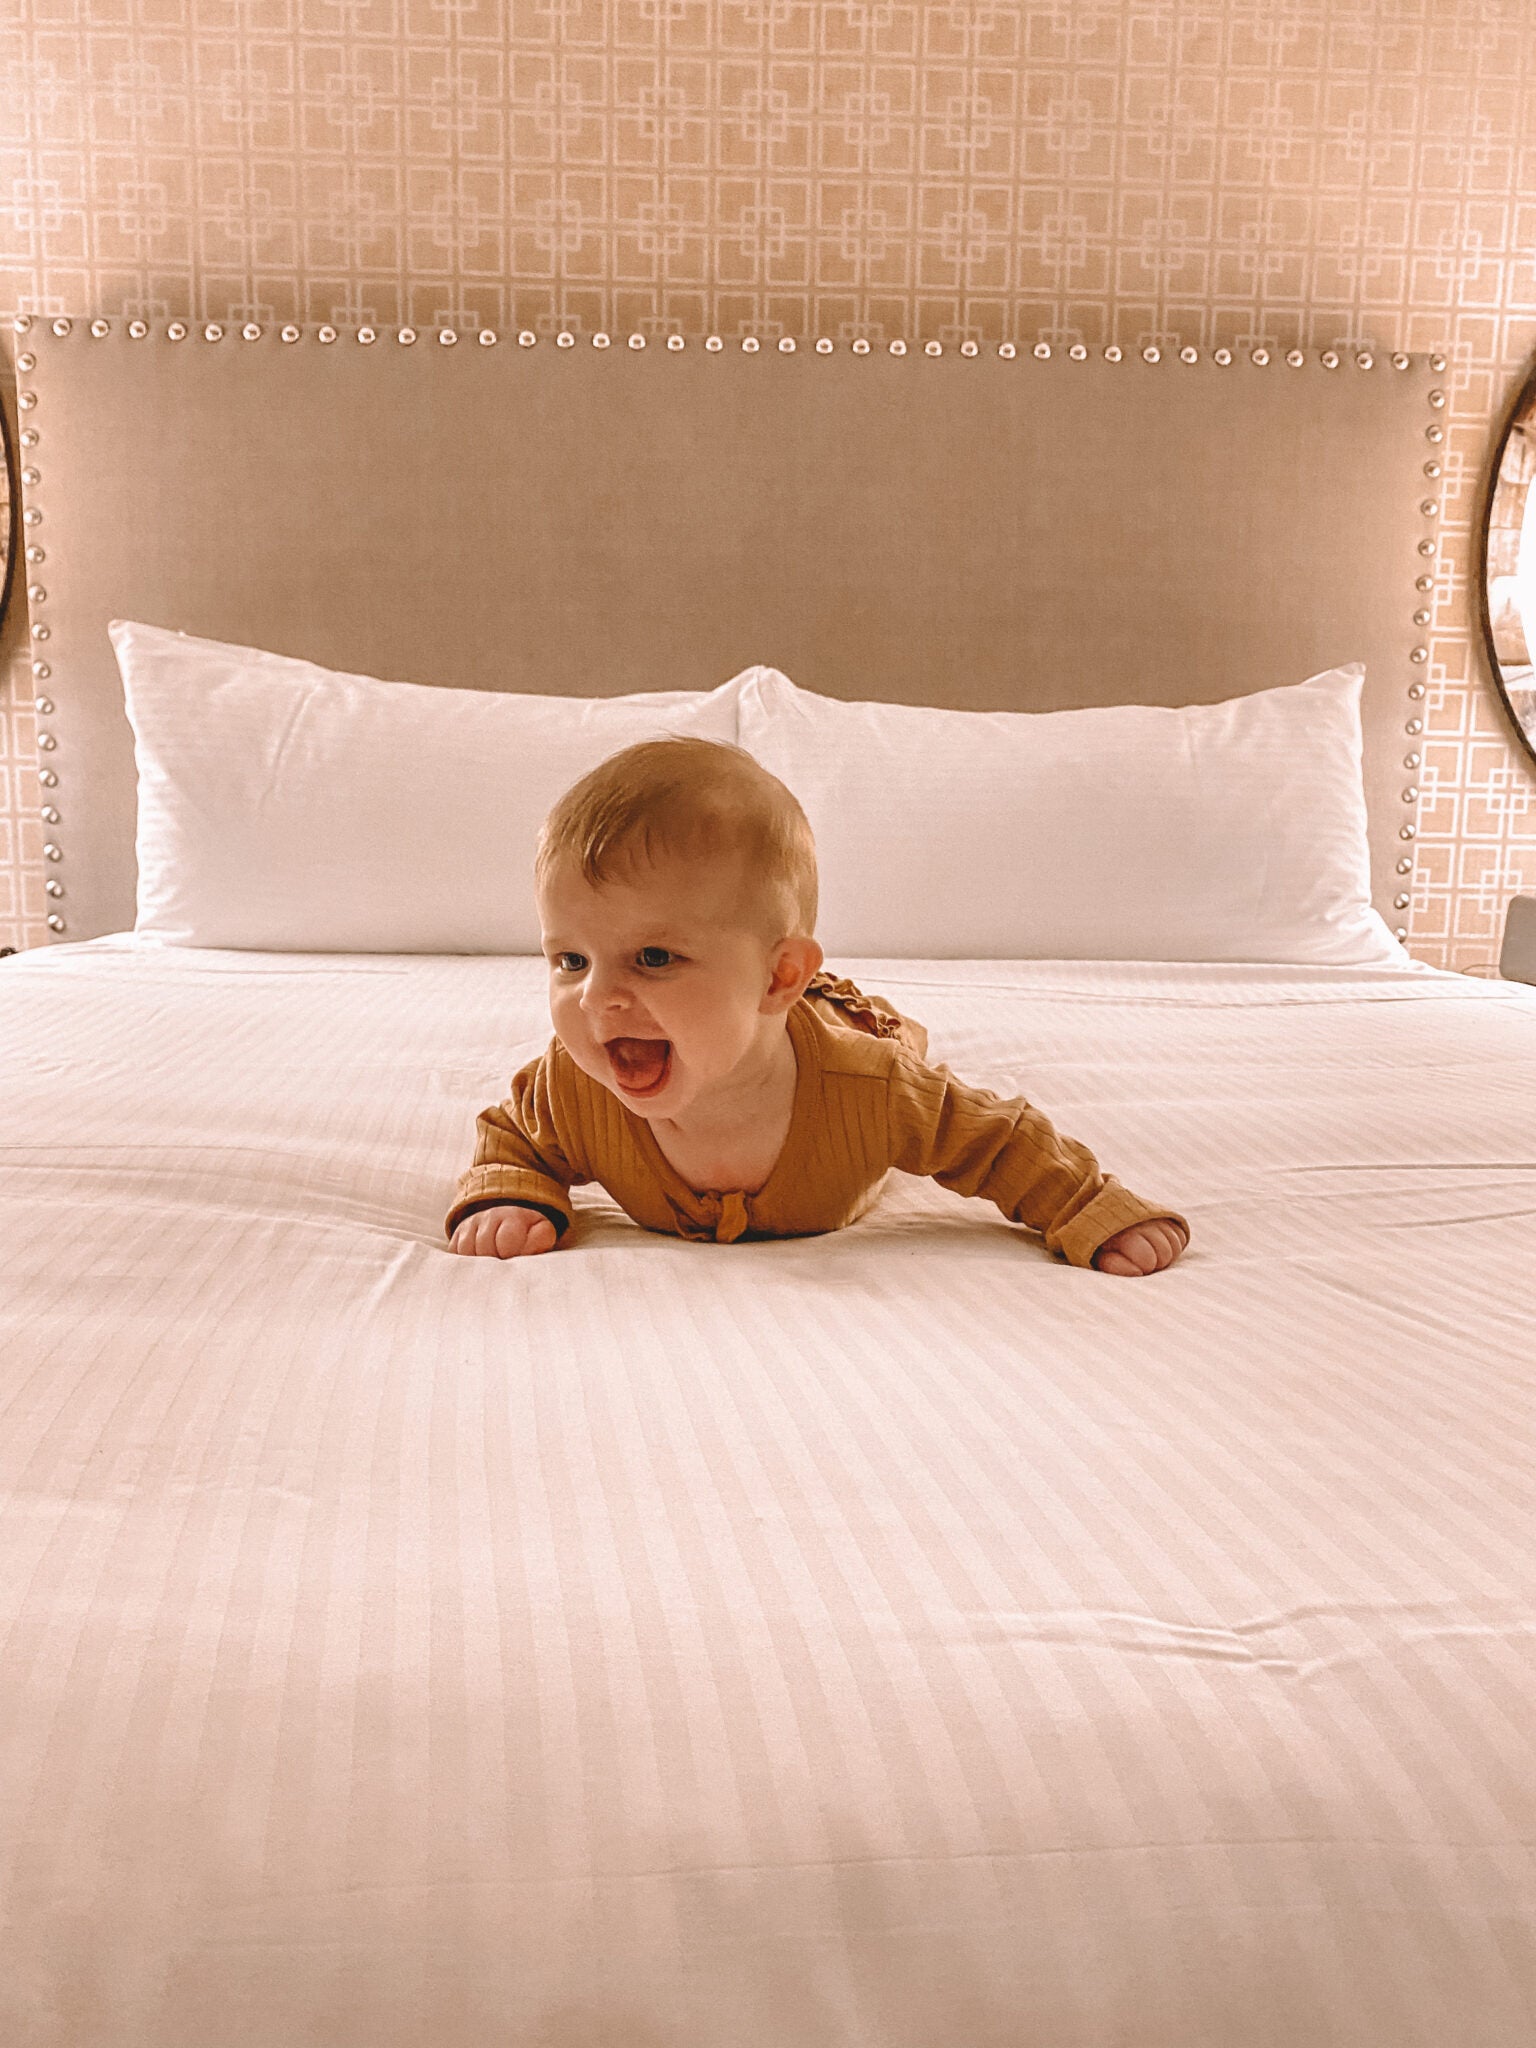 7 Tips For Staying In A Hotel With A Baby